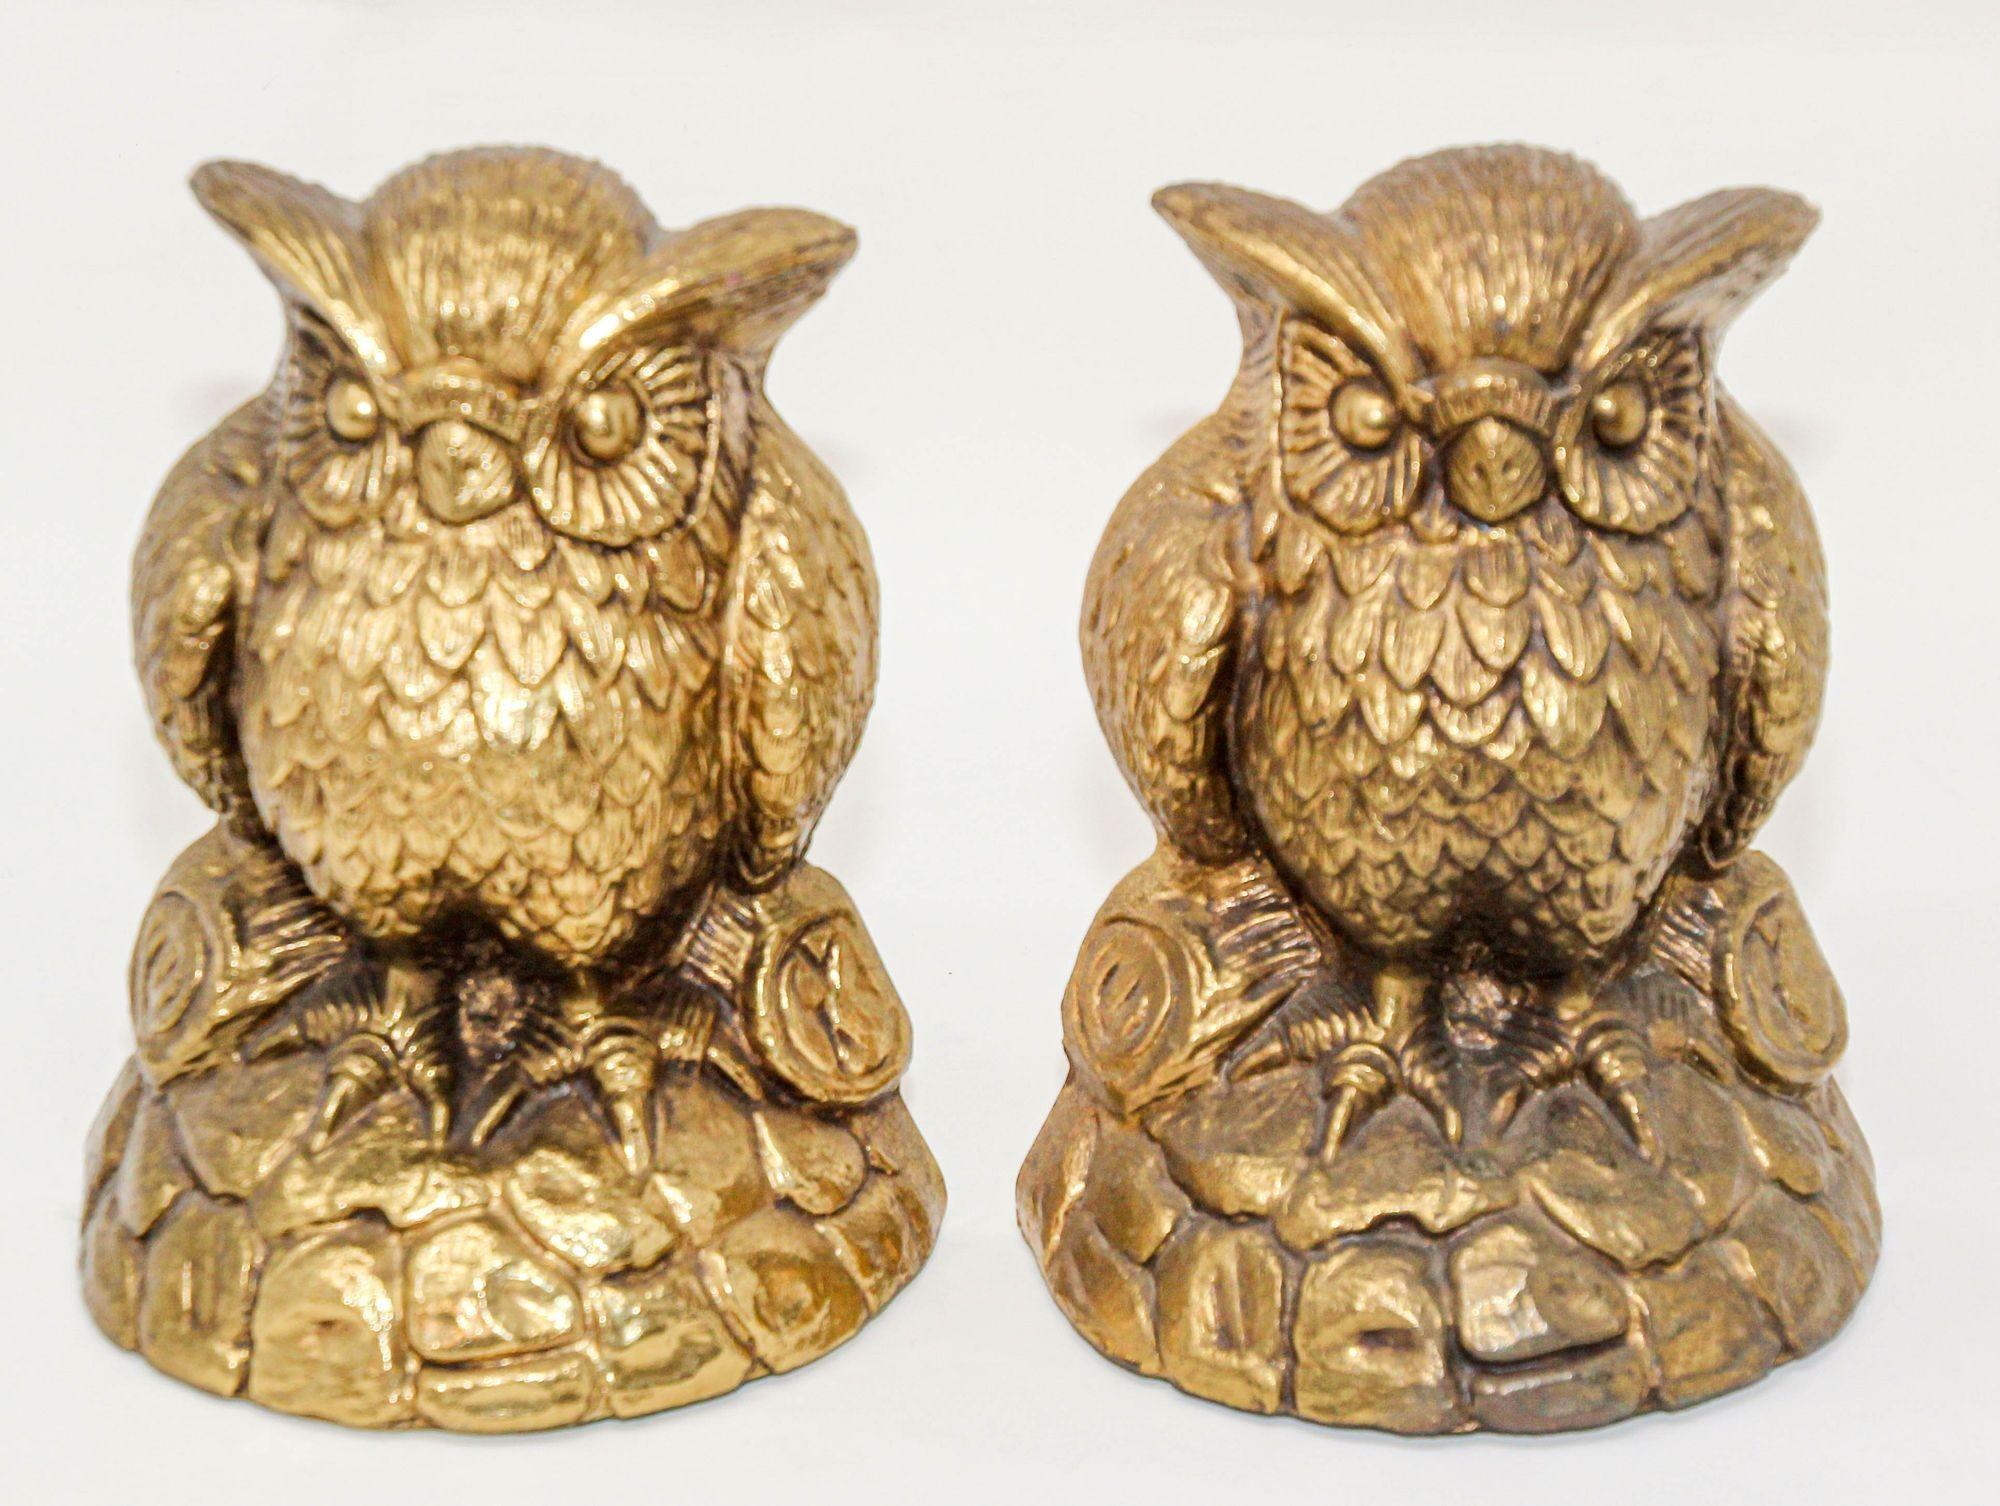 Vintage Cast Solid Brass Owl Bookends Mid-Century Modern 1950s For Sale 5